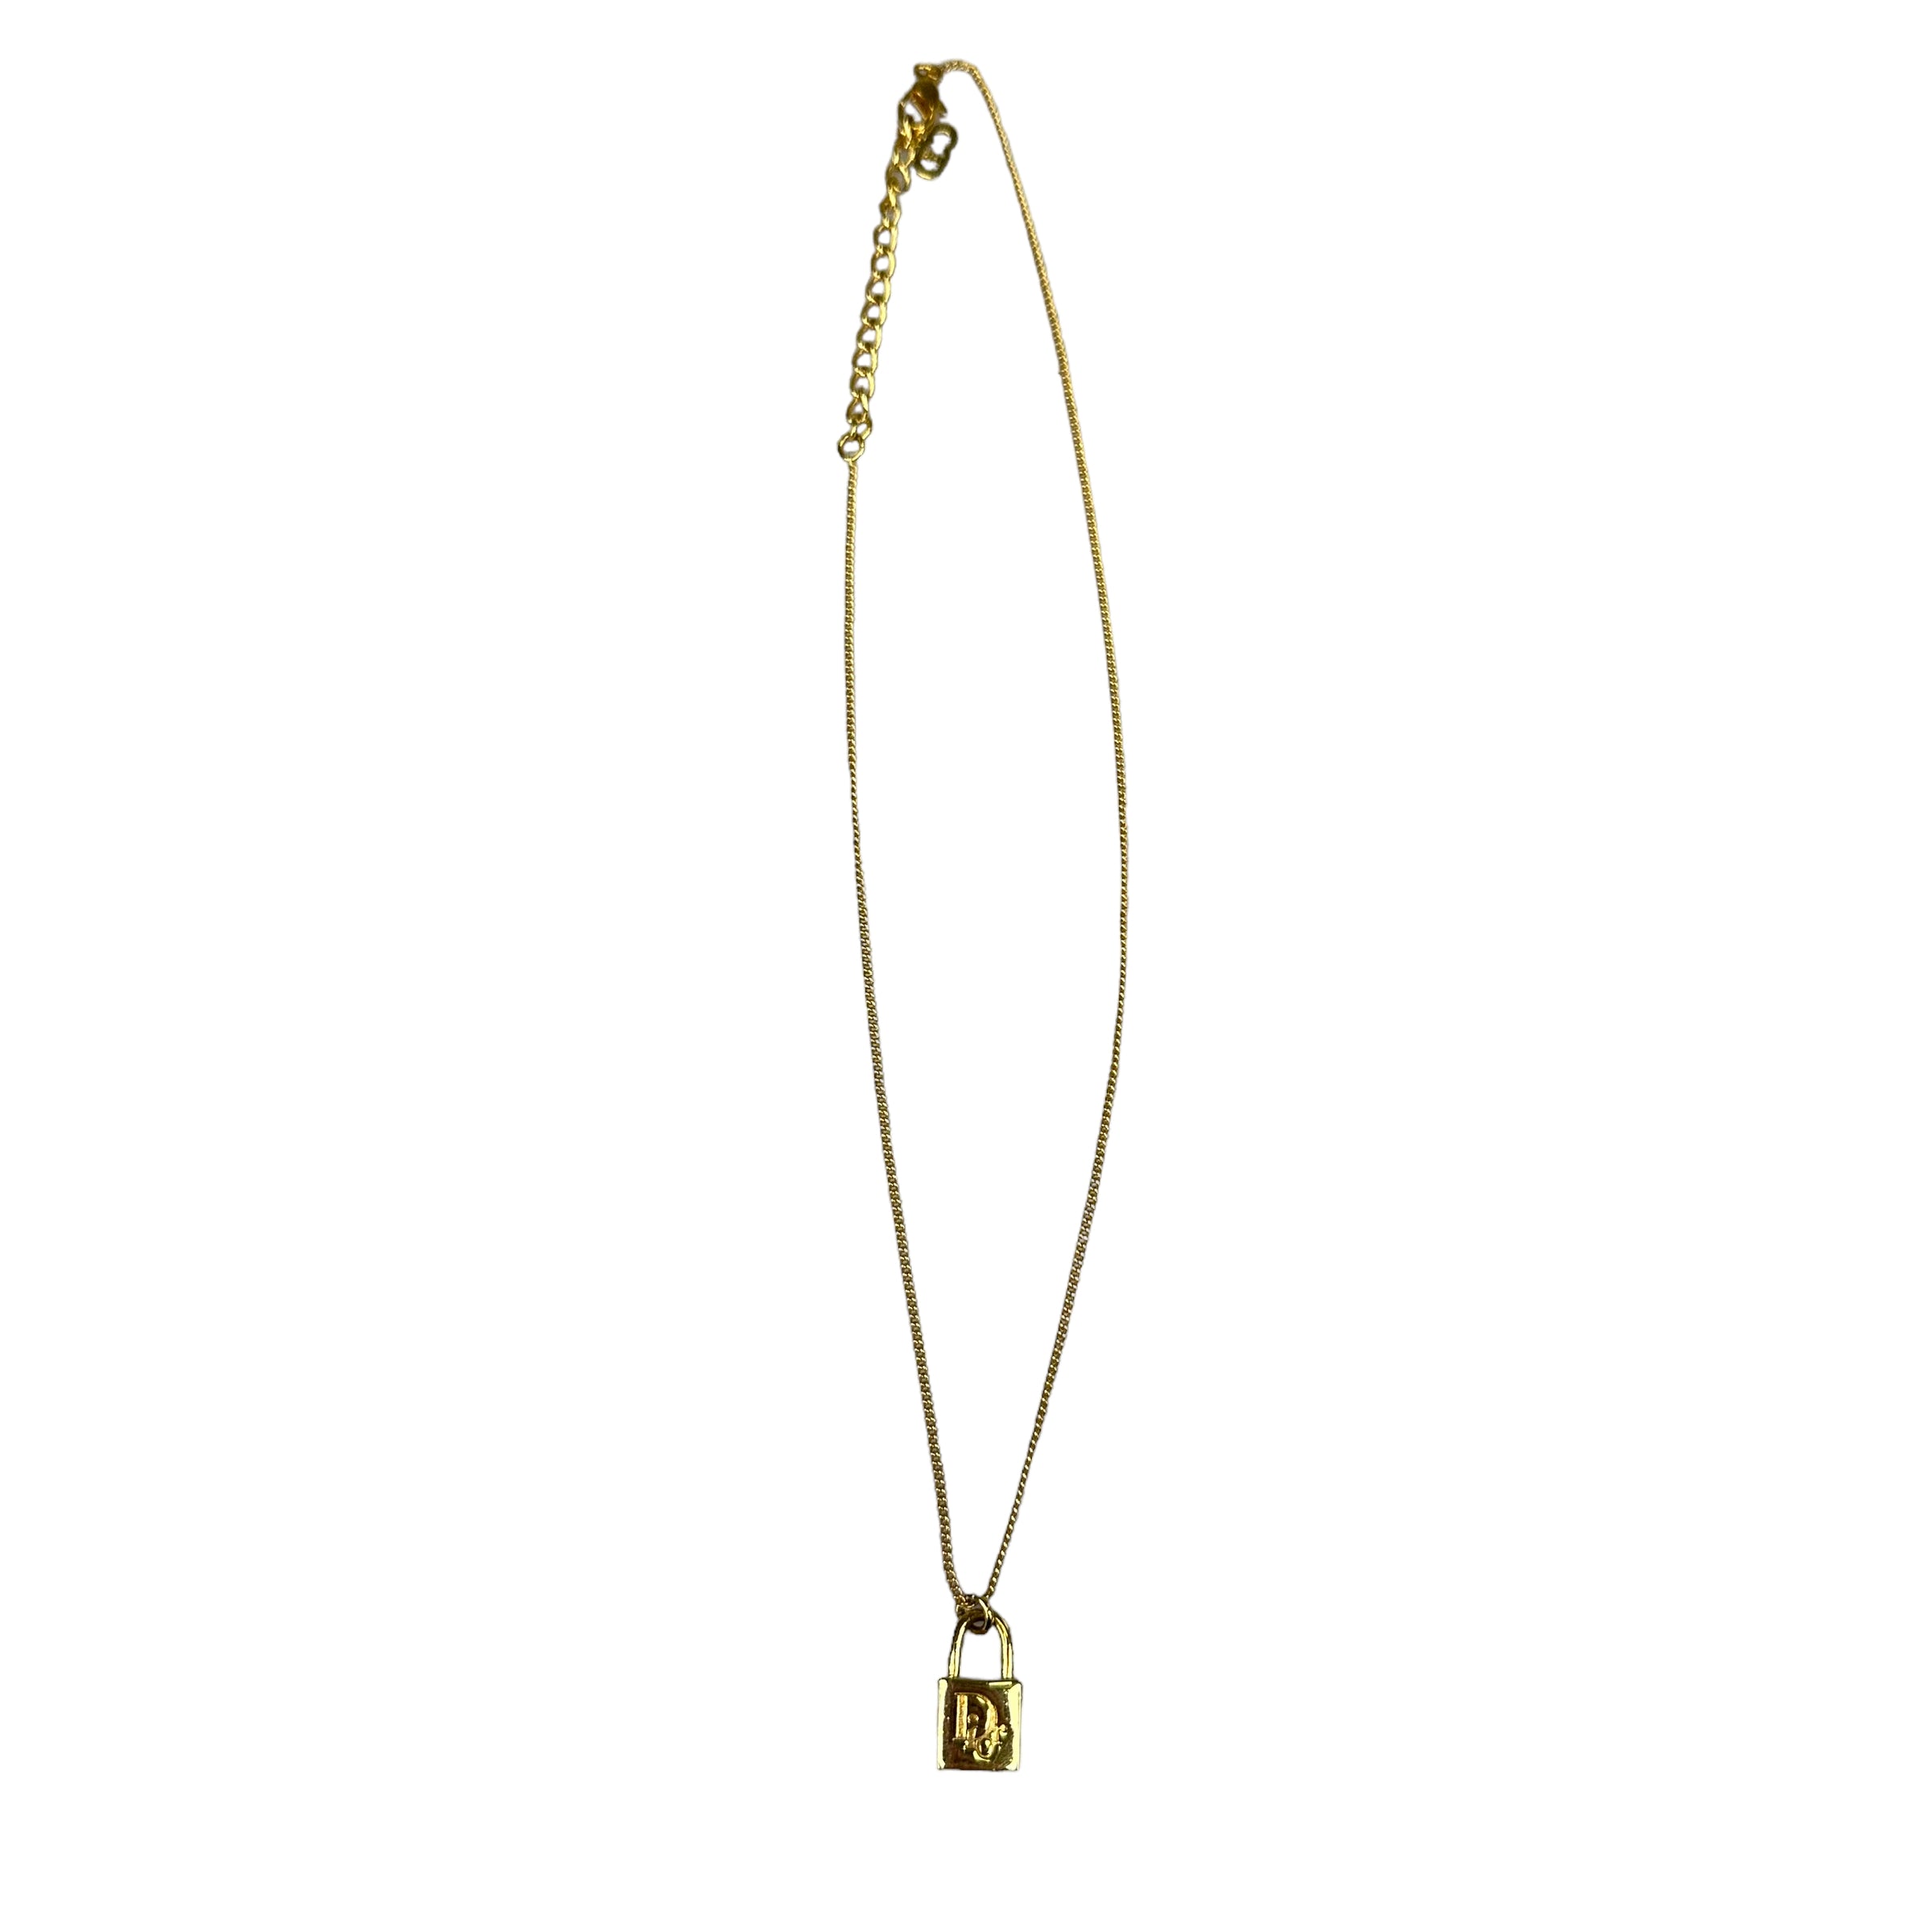 DIOR GOLD PLATED PADLOCK PENDANT NECKLACE